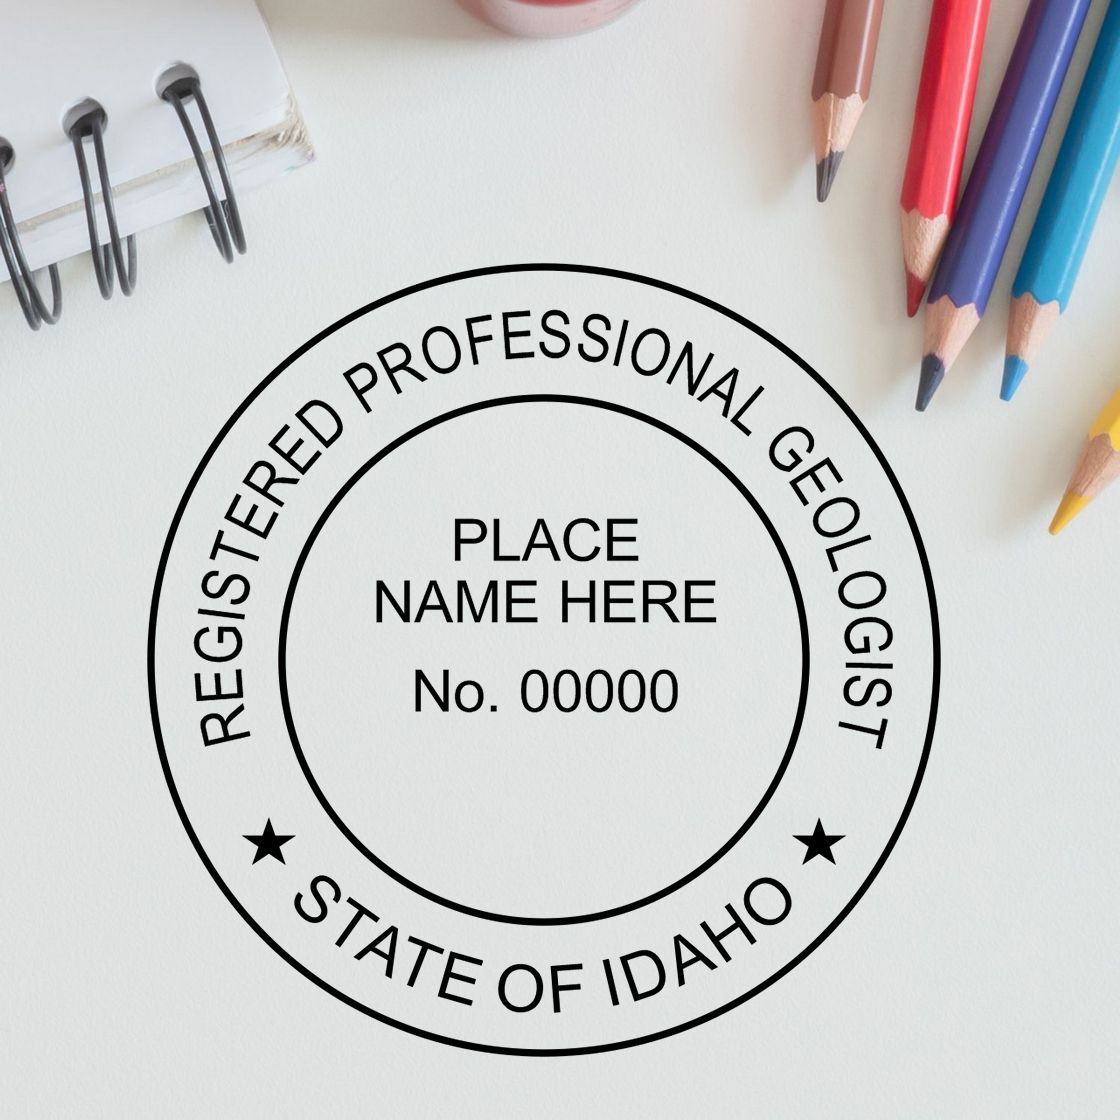 A lifestyle photo showing a stamped image of the Self-Inking Idaho Geologist Stamp on a piece of paper